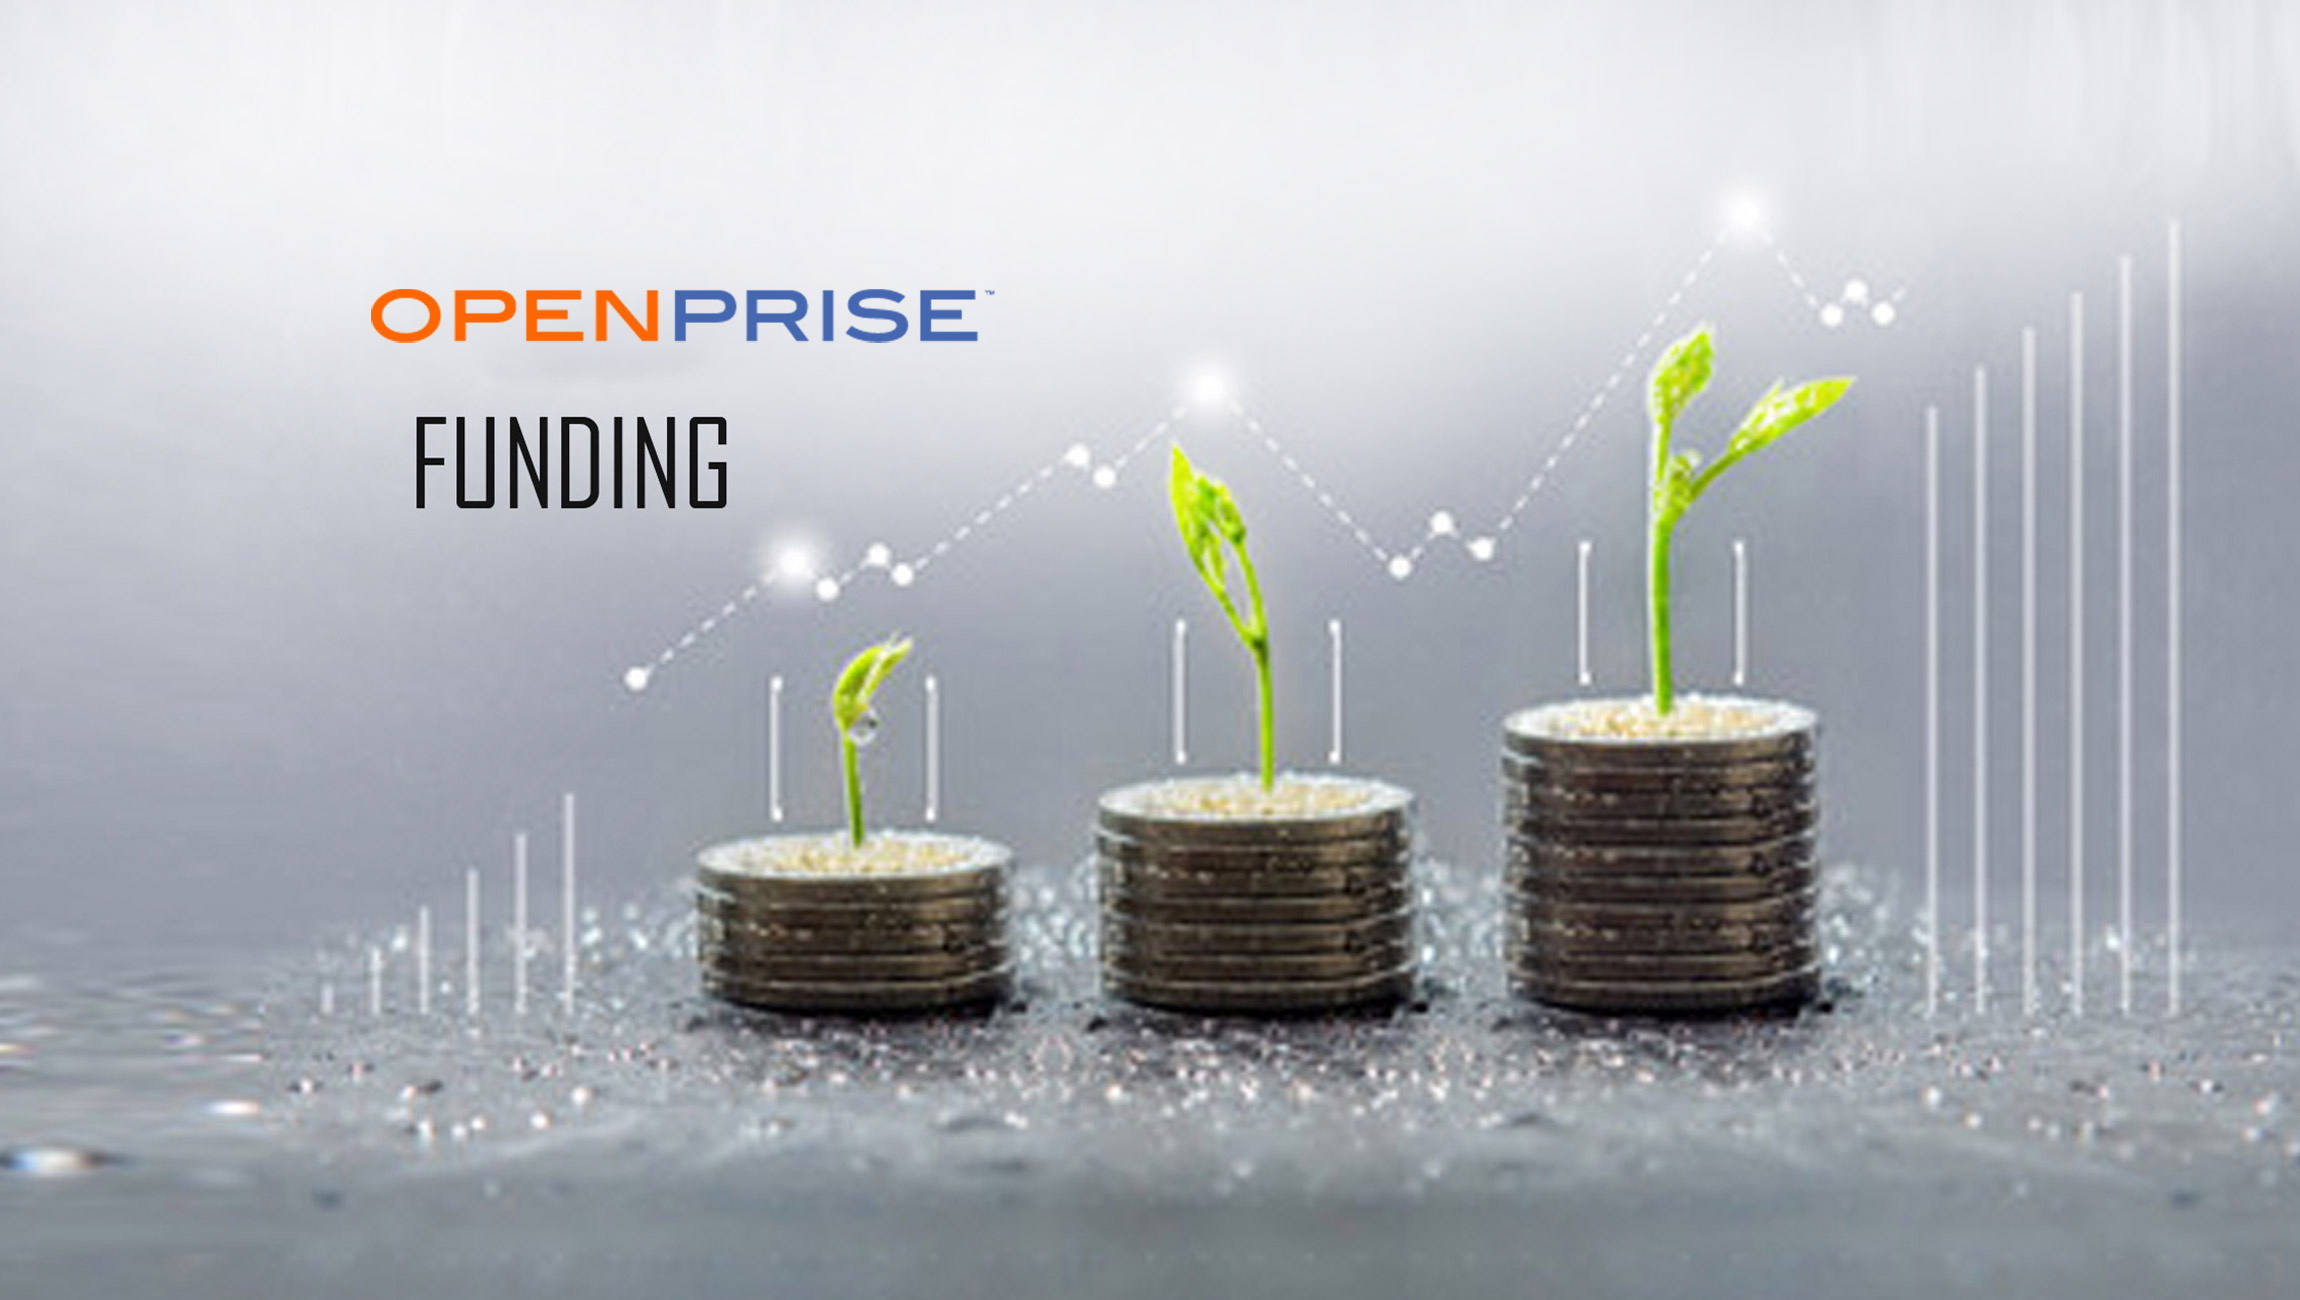 Openprise Raises $16 Million in Series A Funding to Automate RevOps Processes and Help Accelerate Companies' Adoption of RevOps